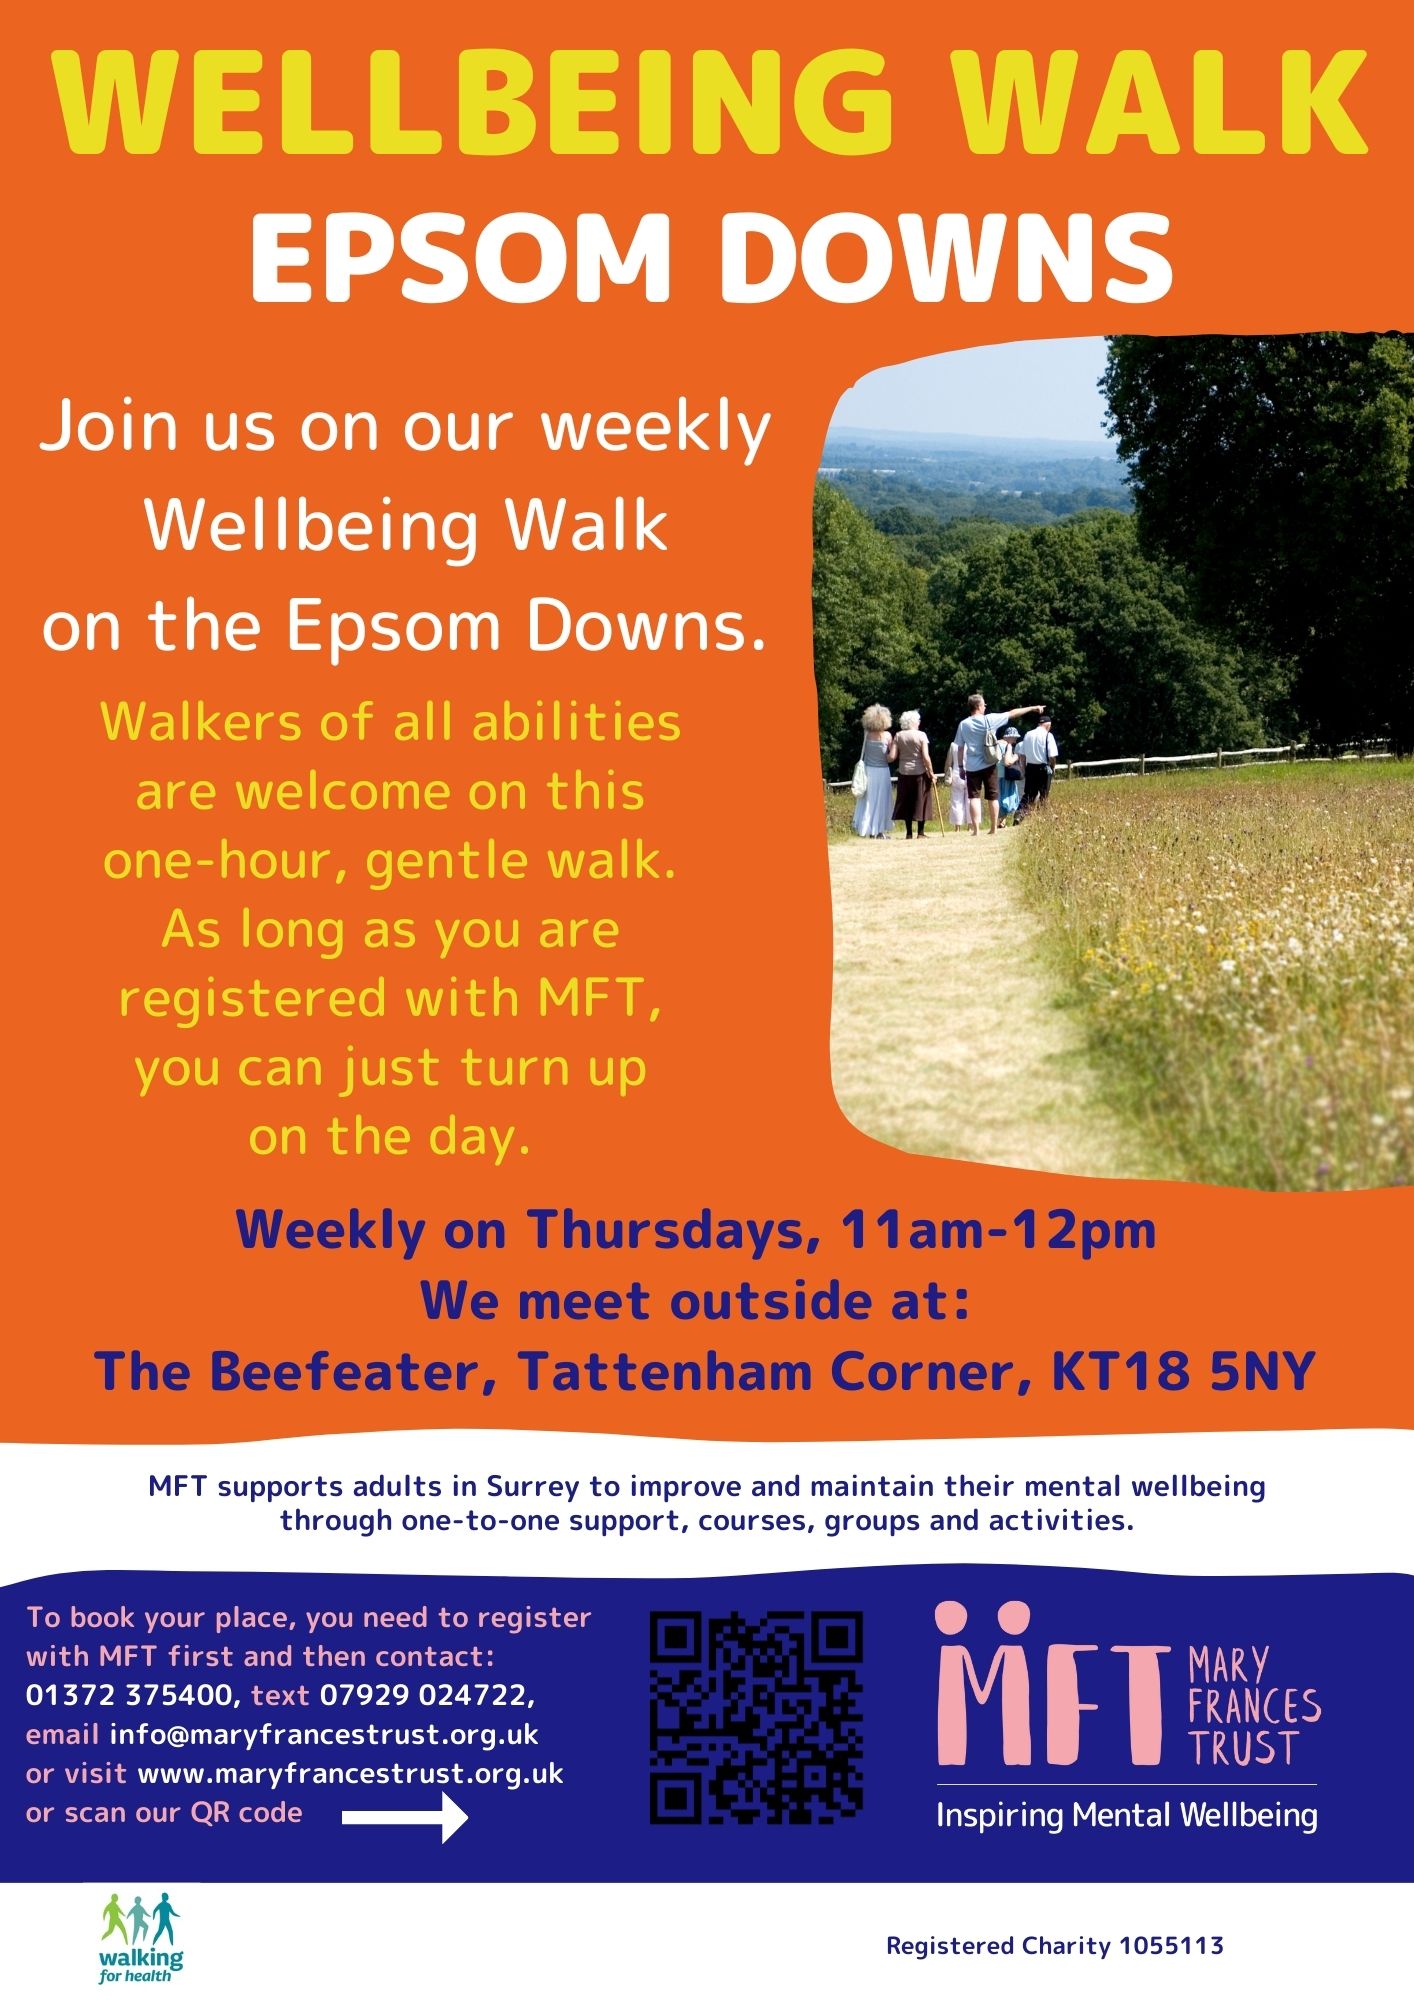 This is Mary Frances Trust's weekly walking group on Epsom Downs every Thursday.